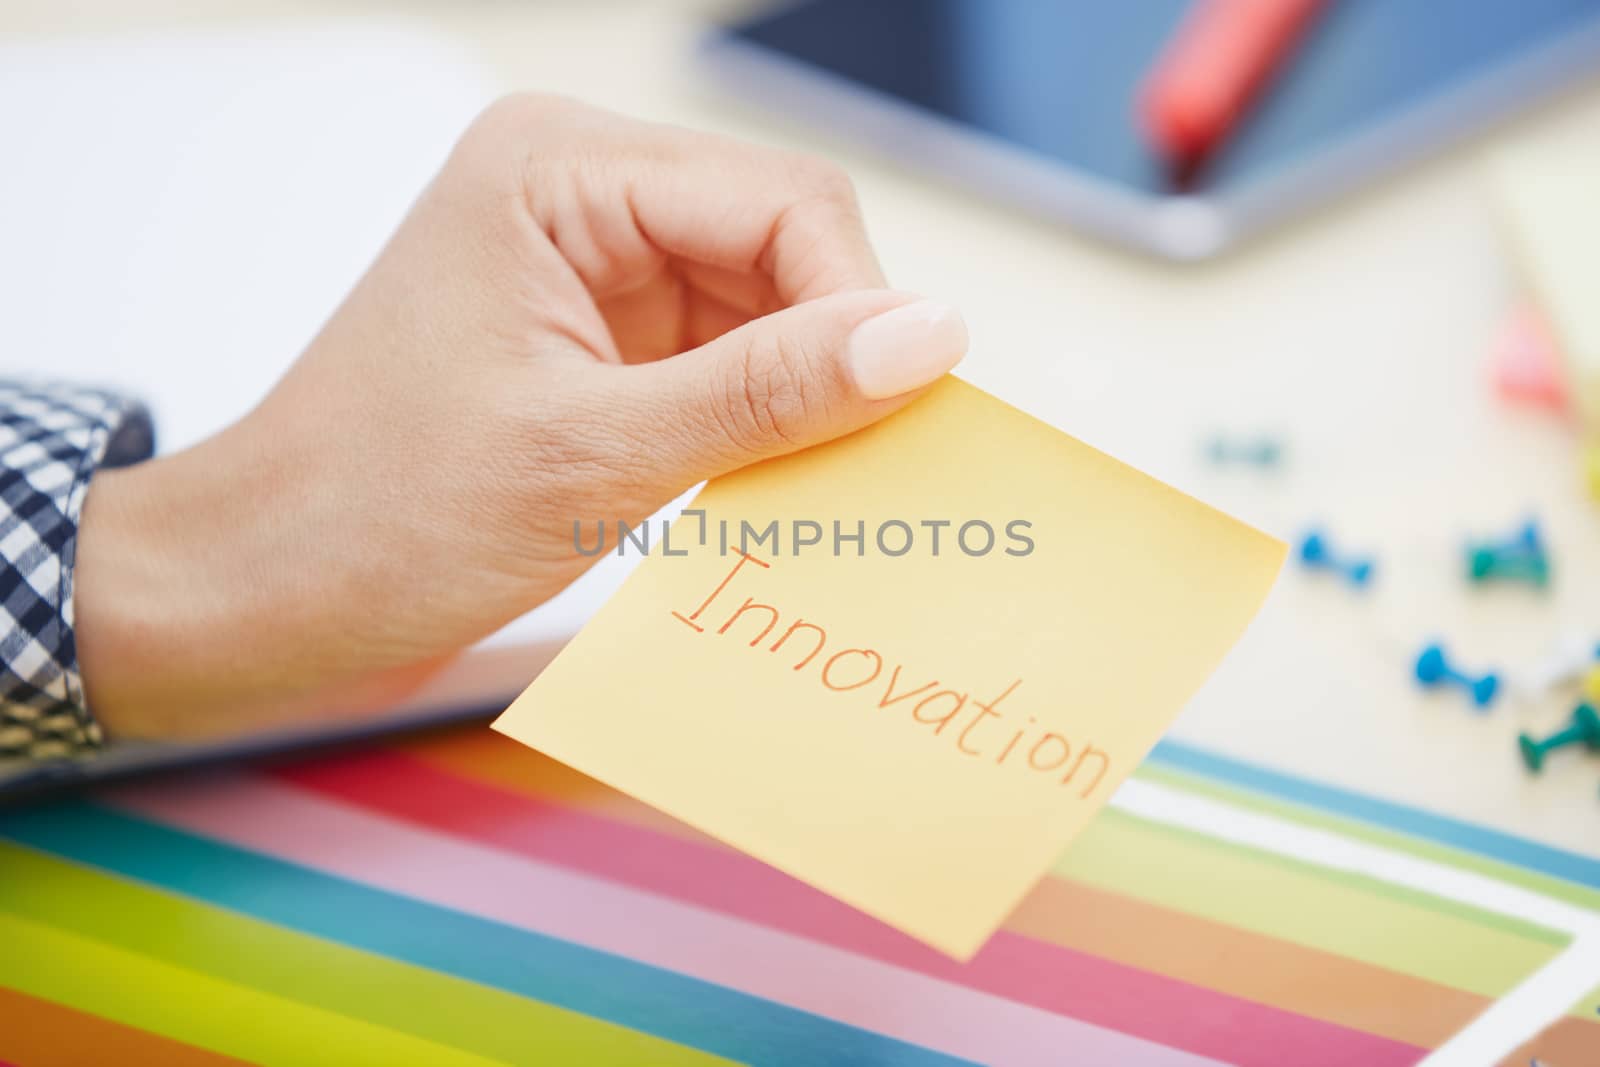 Human hand holding adhesive note with Innovation text